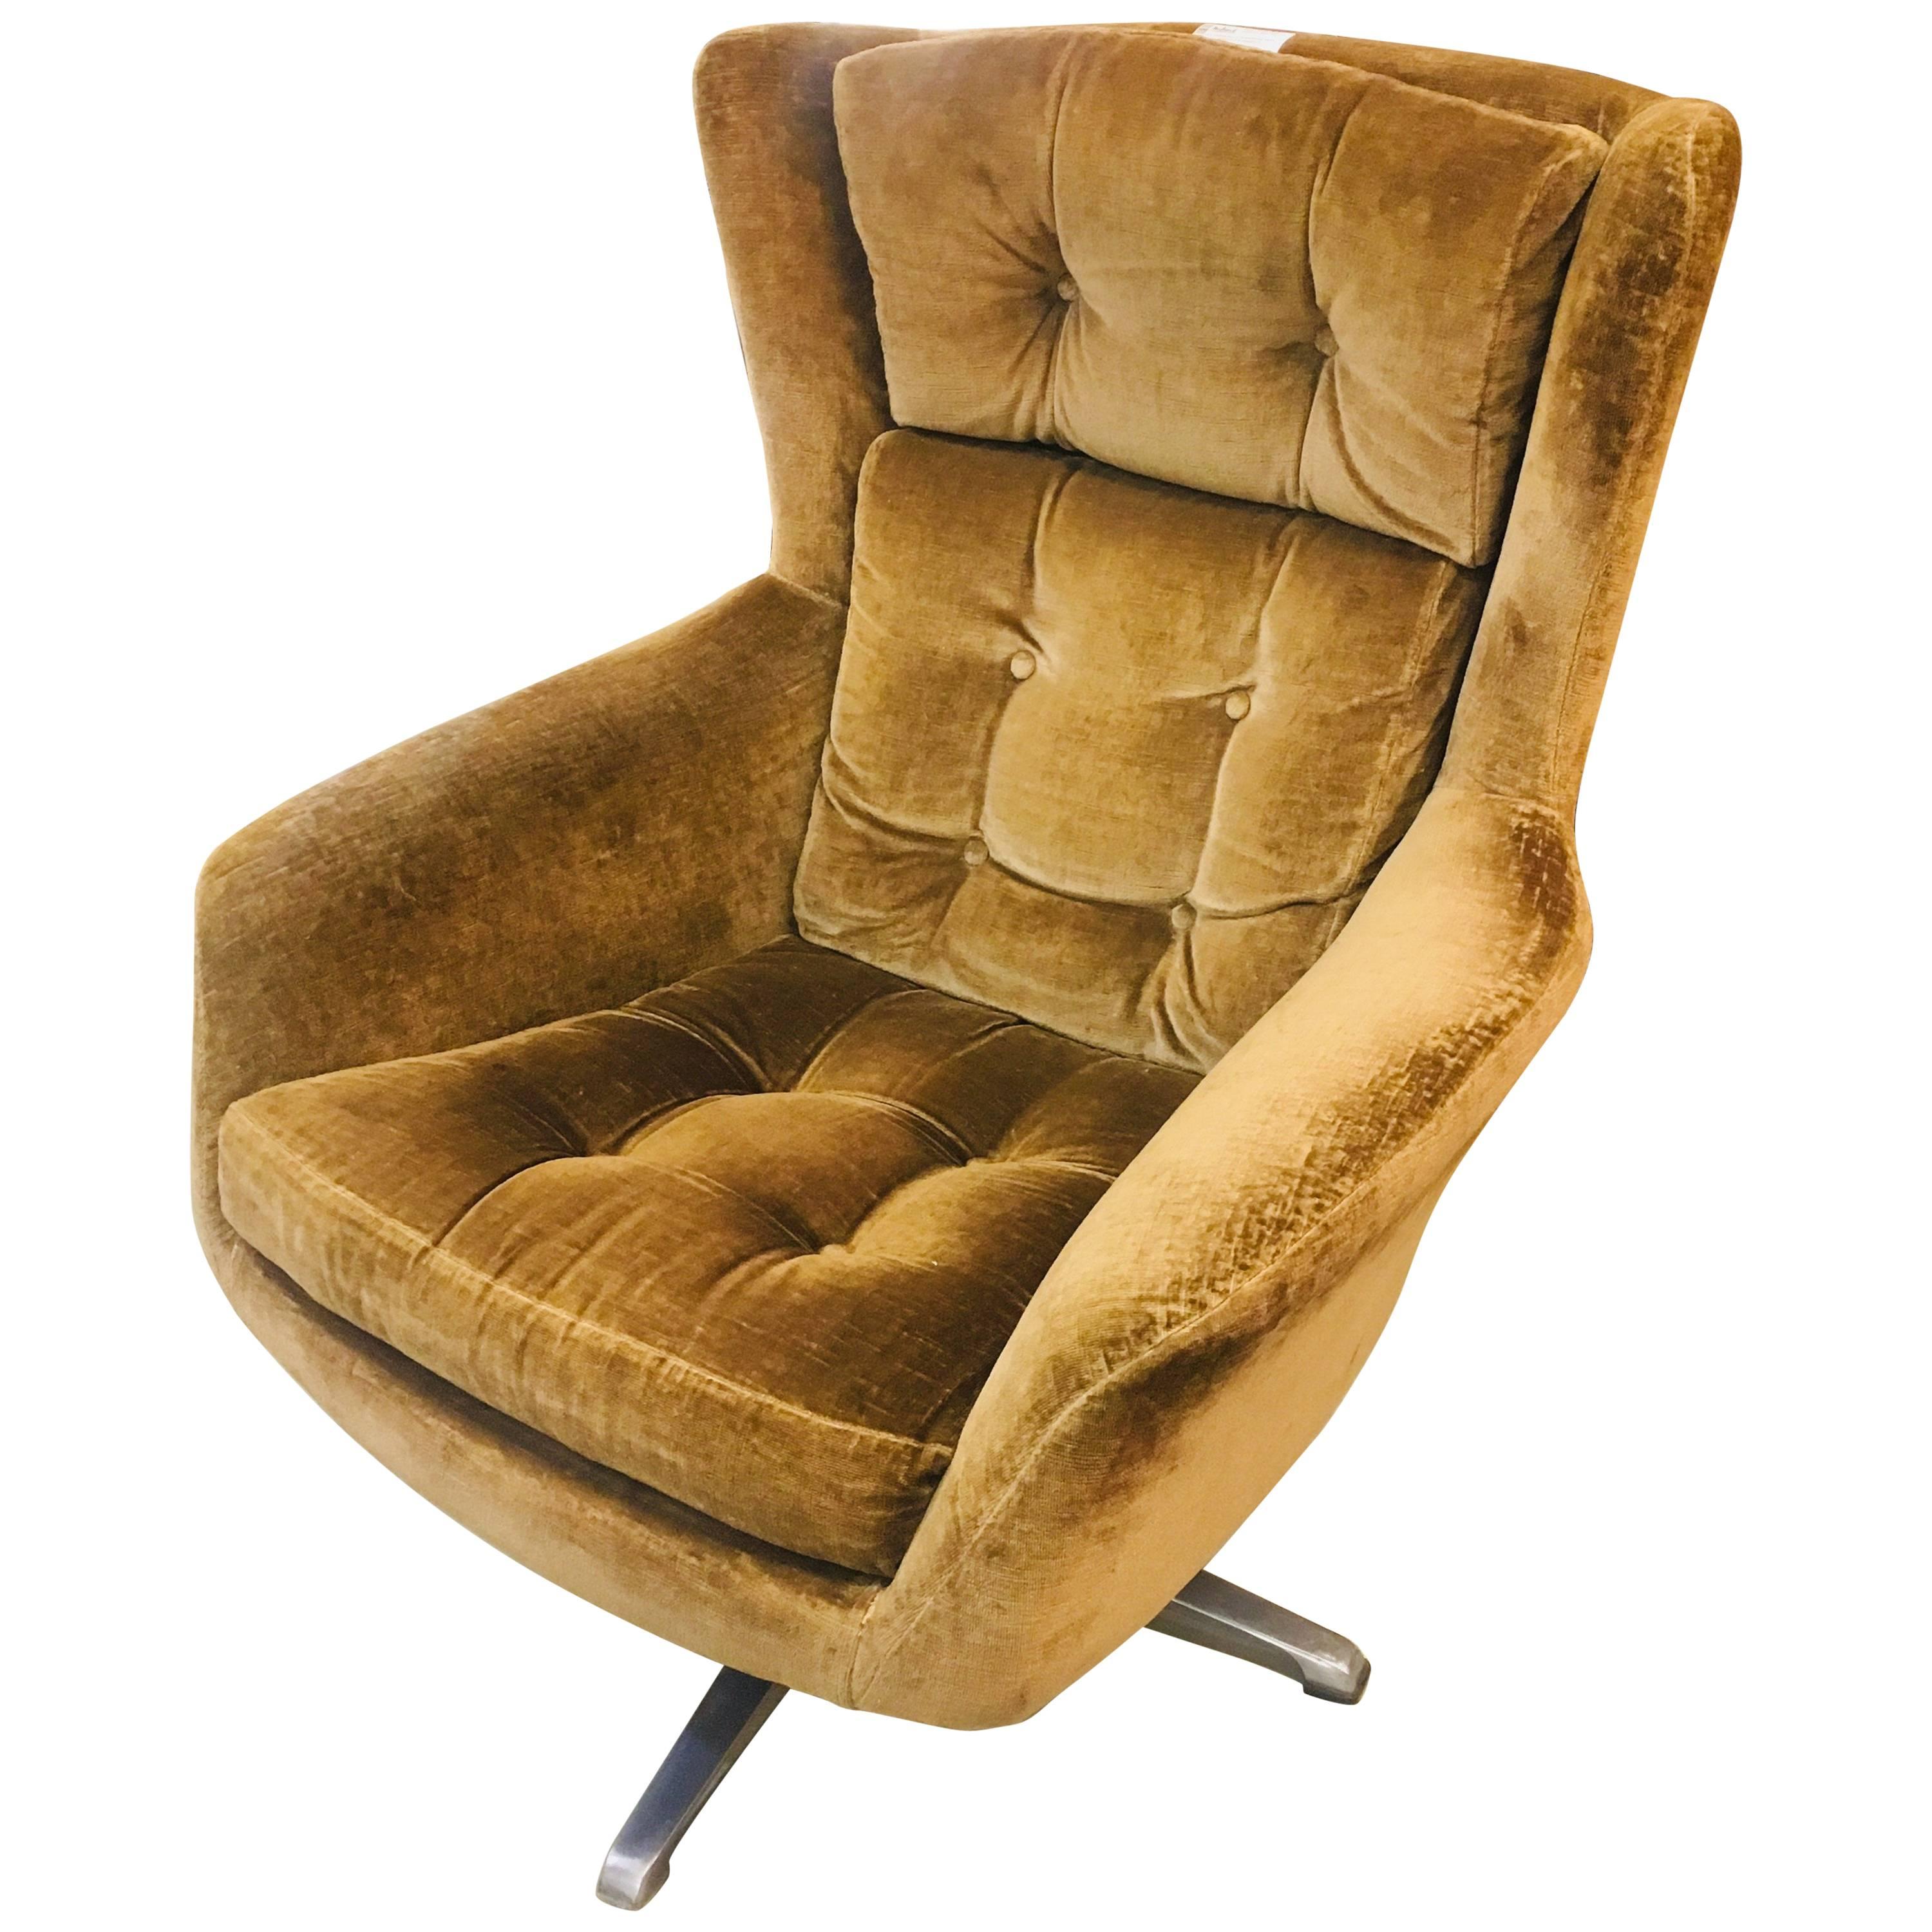 20th Century Comfortable Lounge Chair in Original Upholstery, circa 1950